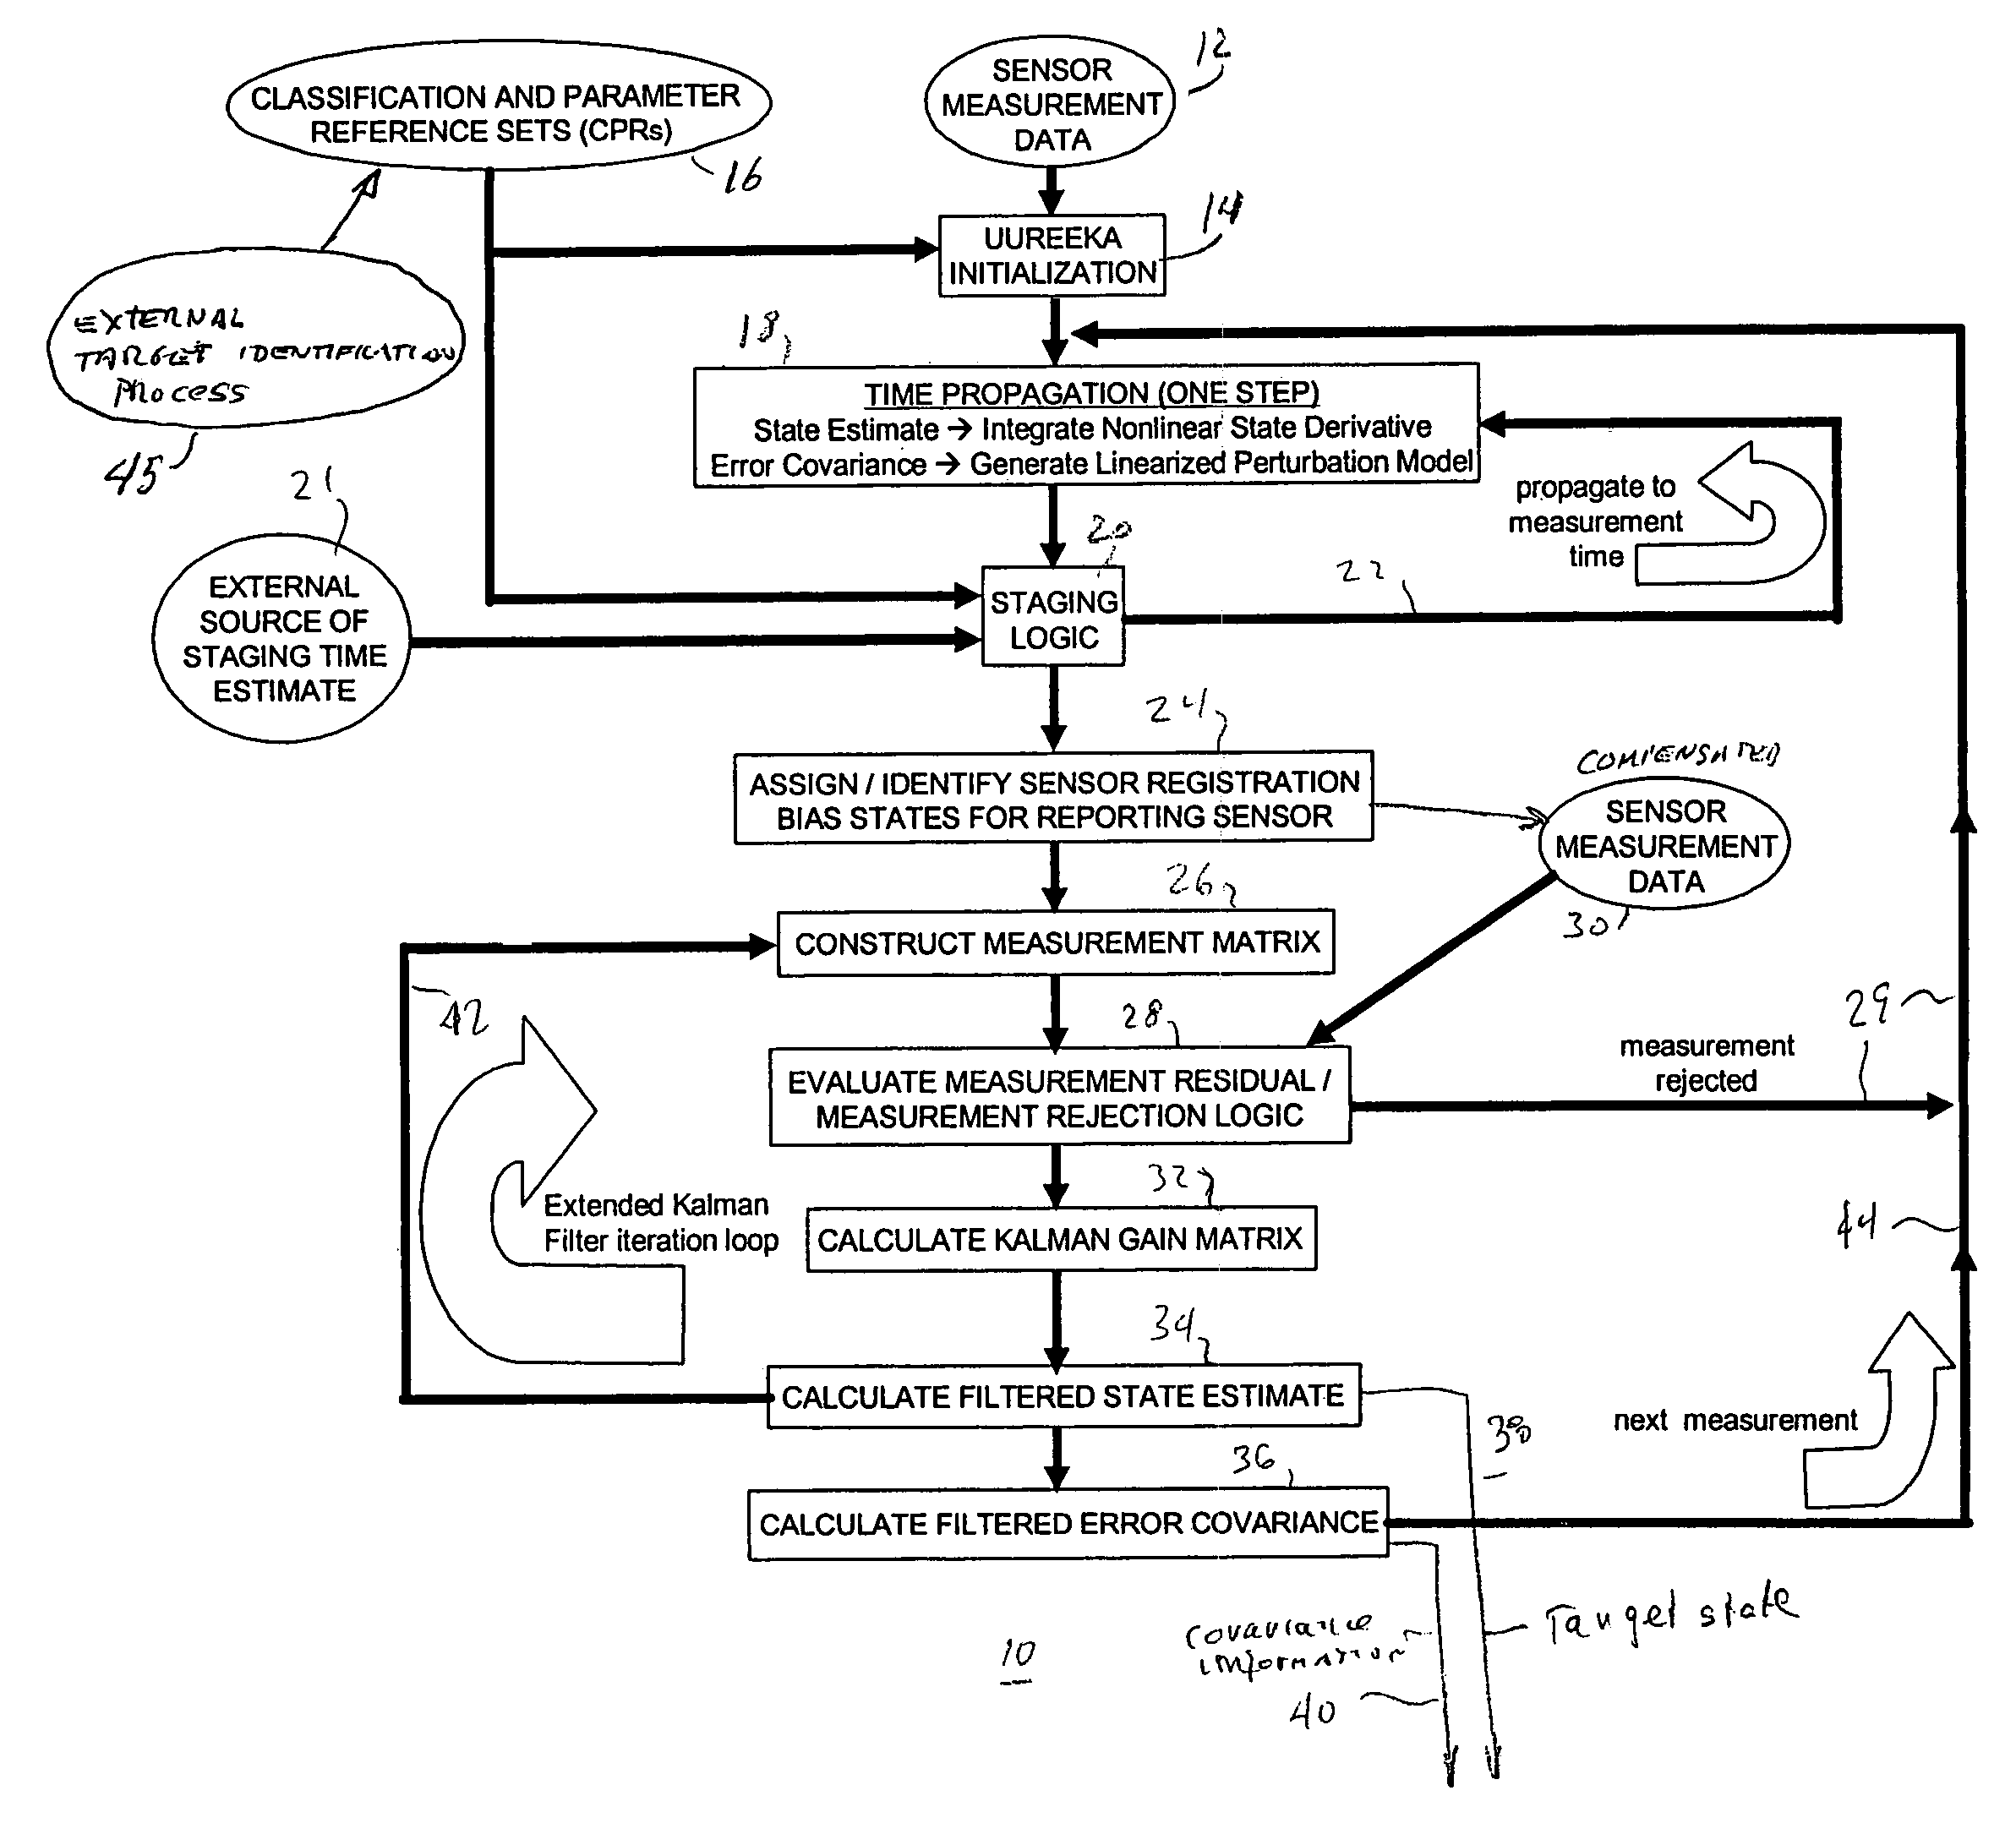 Computerized method for generating low-bias estimates of position of a vehicle from sensor data